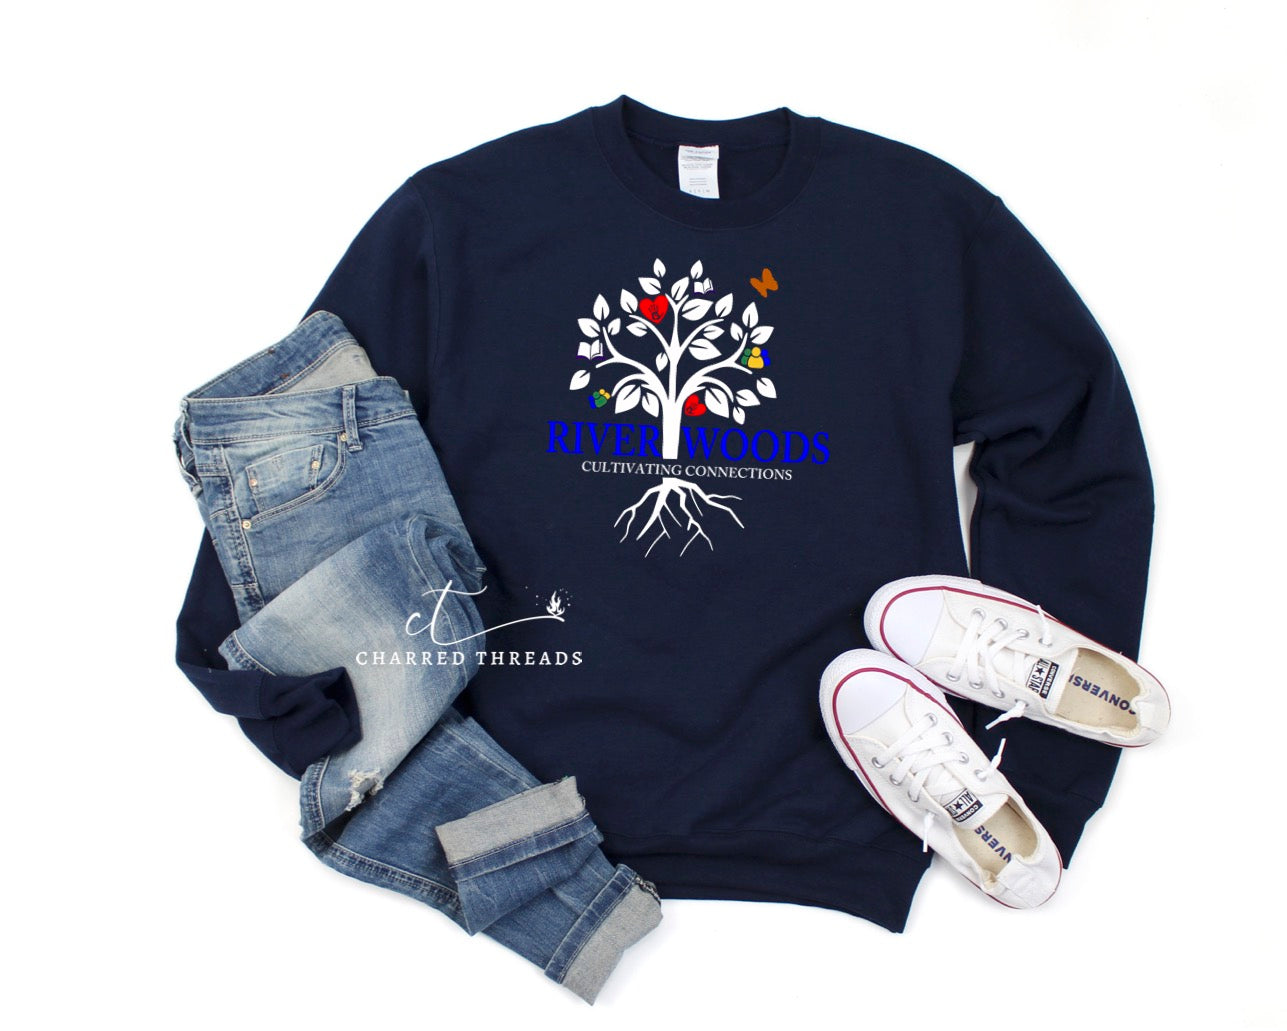 2019 River Woods Elementary Cultivating Connections Crewneck Sweatshirt